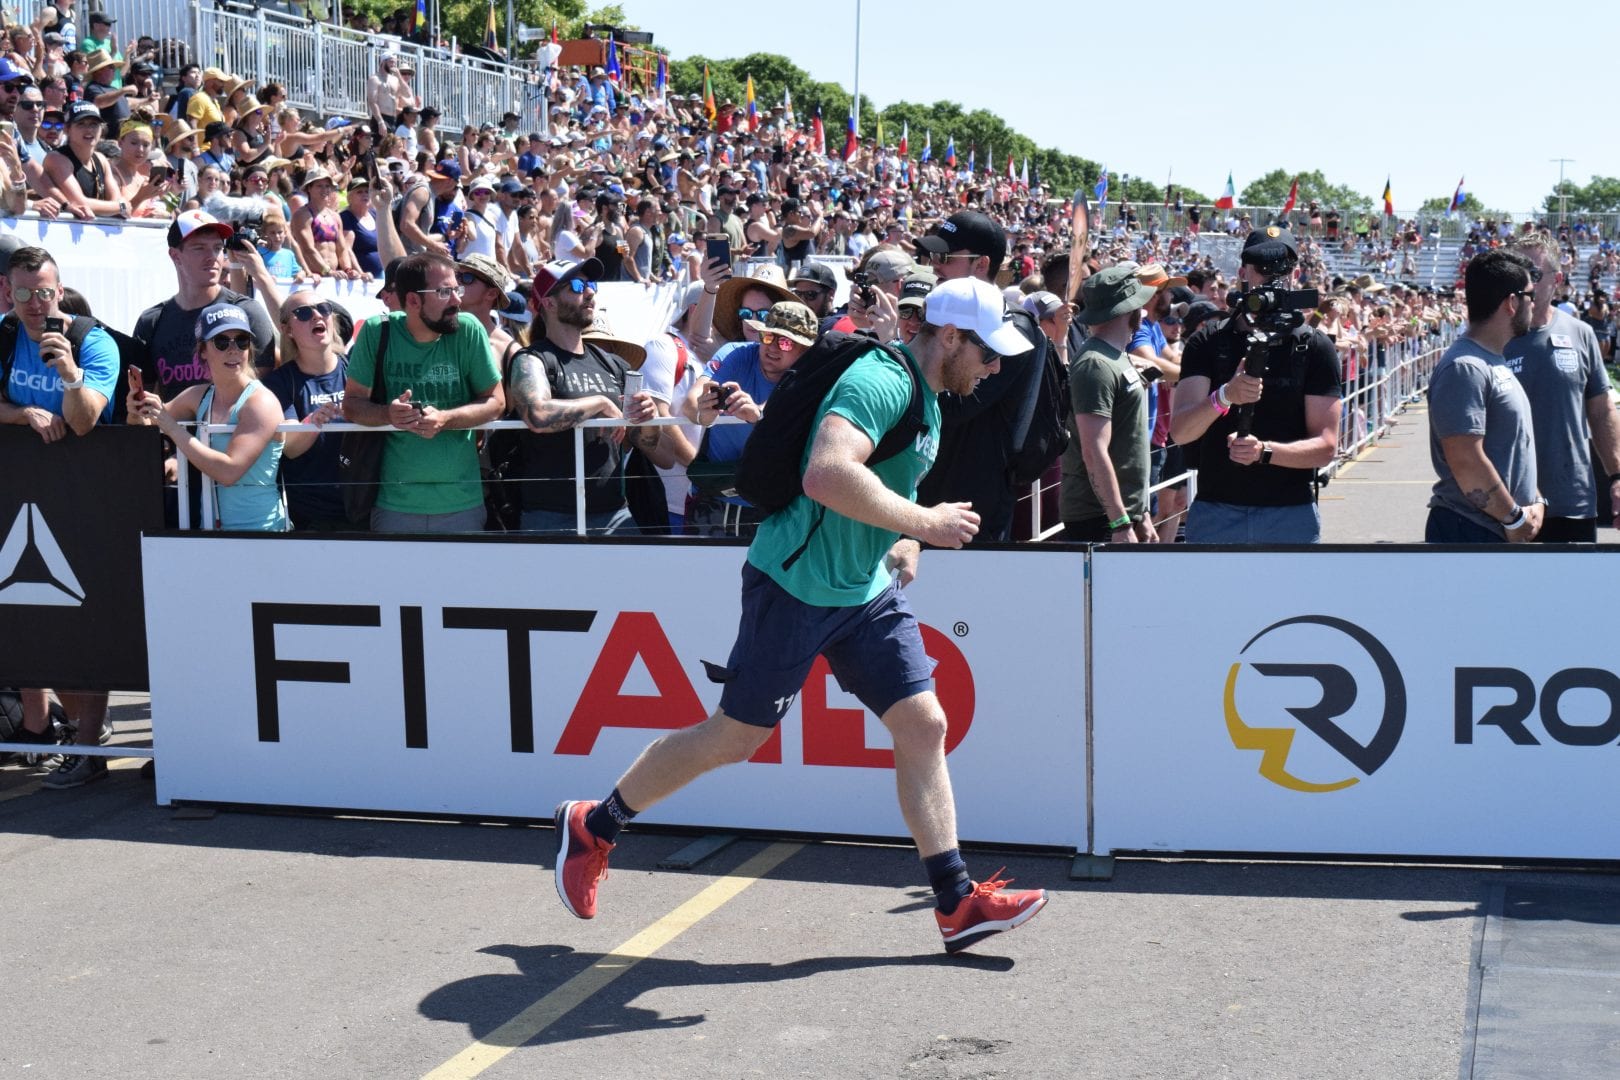 Patrick Vellner completes the Ruck Run event at the 2019 CrossFit Games